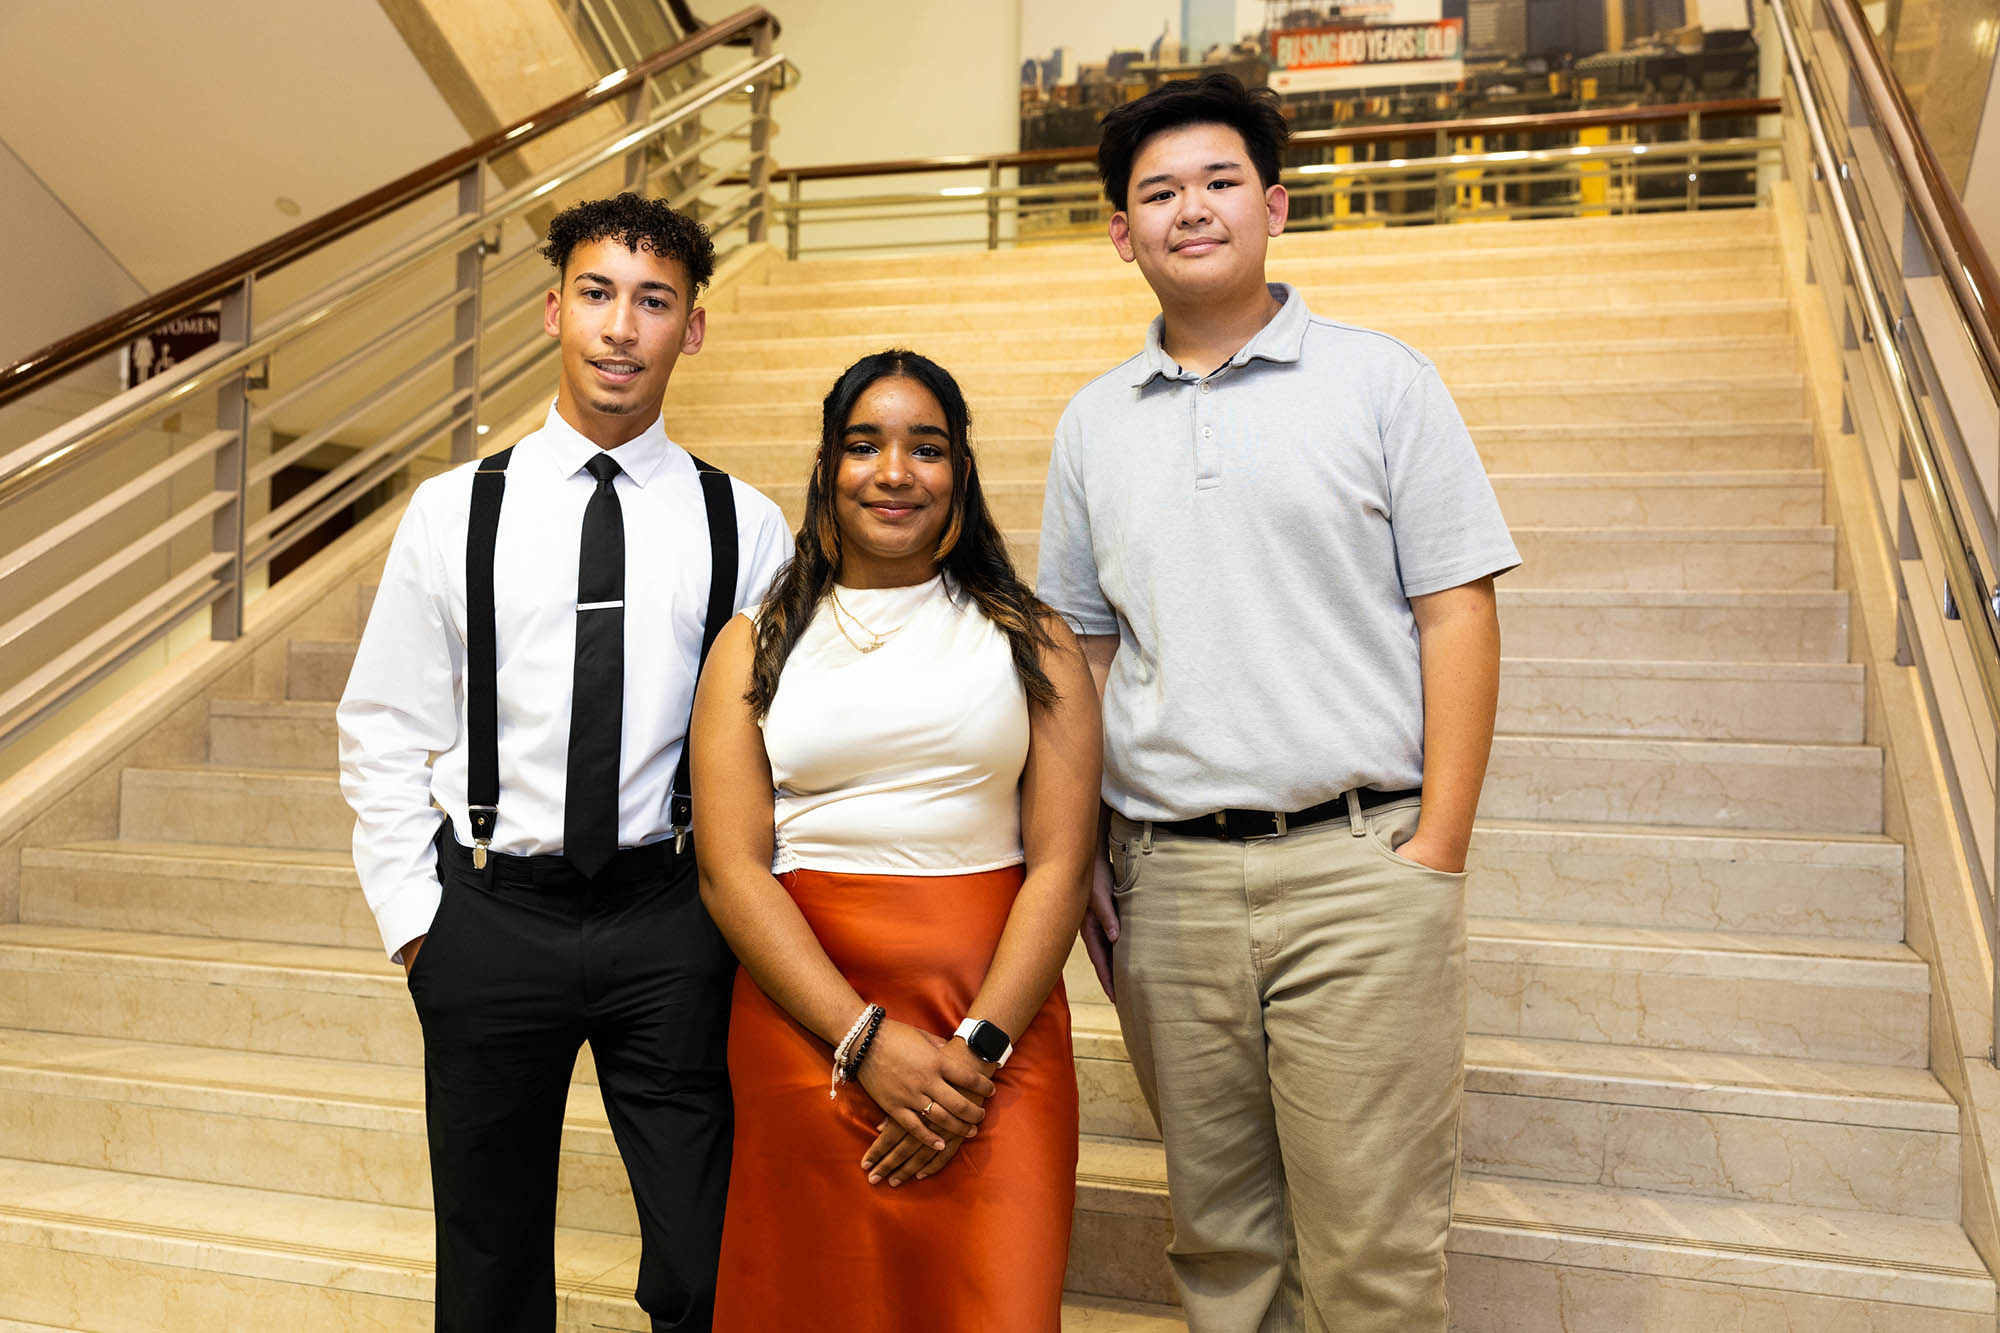 Photo: Three students wearing business casual attire stand and pose at the bottom of a large set of stairs. From left to right: Zaki Araujo, a tan young man with black, curly hair and wearing a light blue collared shirt and black tie, suspenders, and pants. Raysa Mendoza, a young, tan woman wearing a white blouse and long, red skirt. Kenny Phan, a young man wearing a light blue collared shirt and khaki pants.